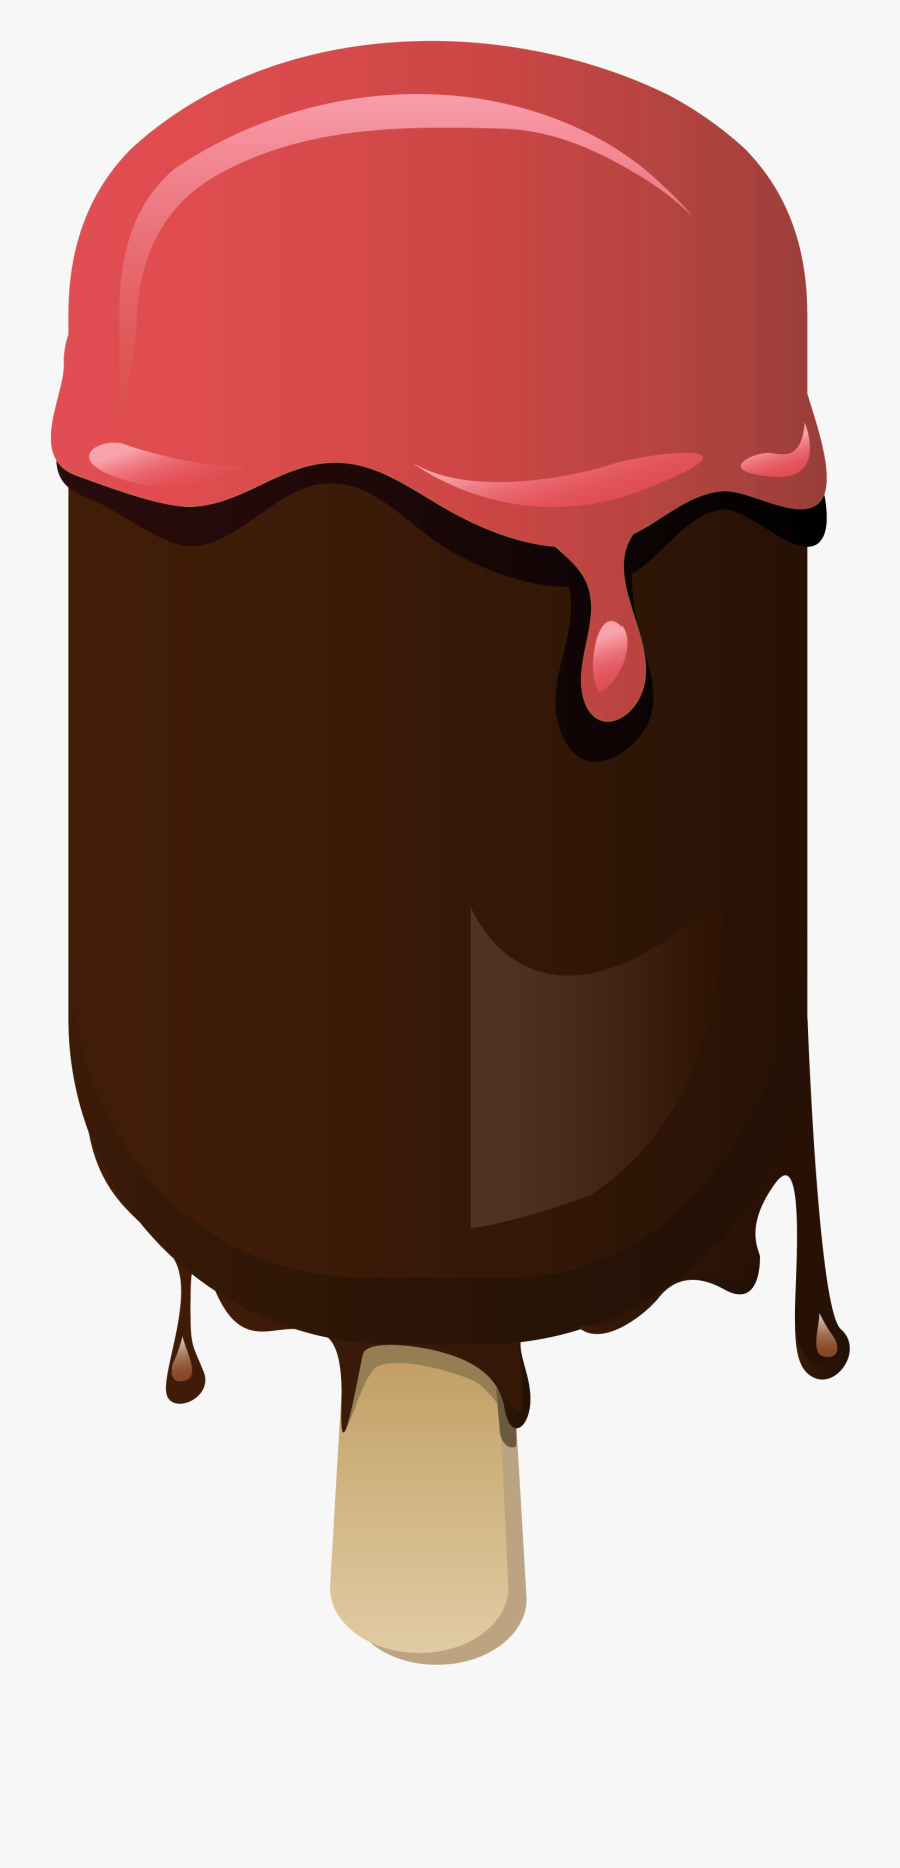 Ice Cream On Stick Png, Transparent Clipart